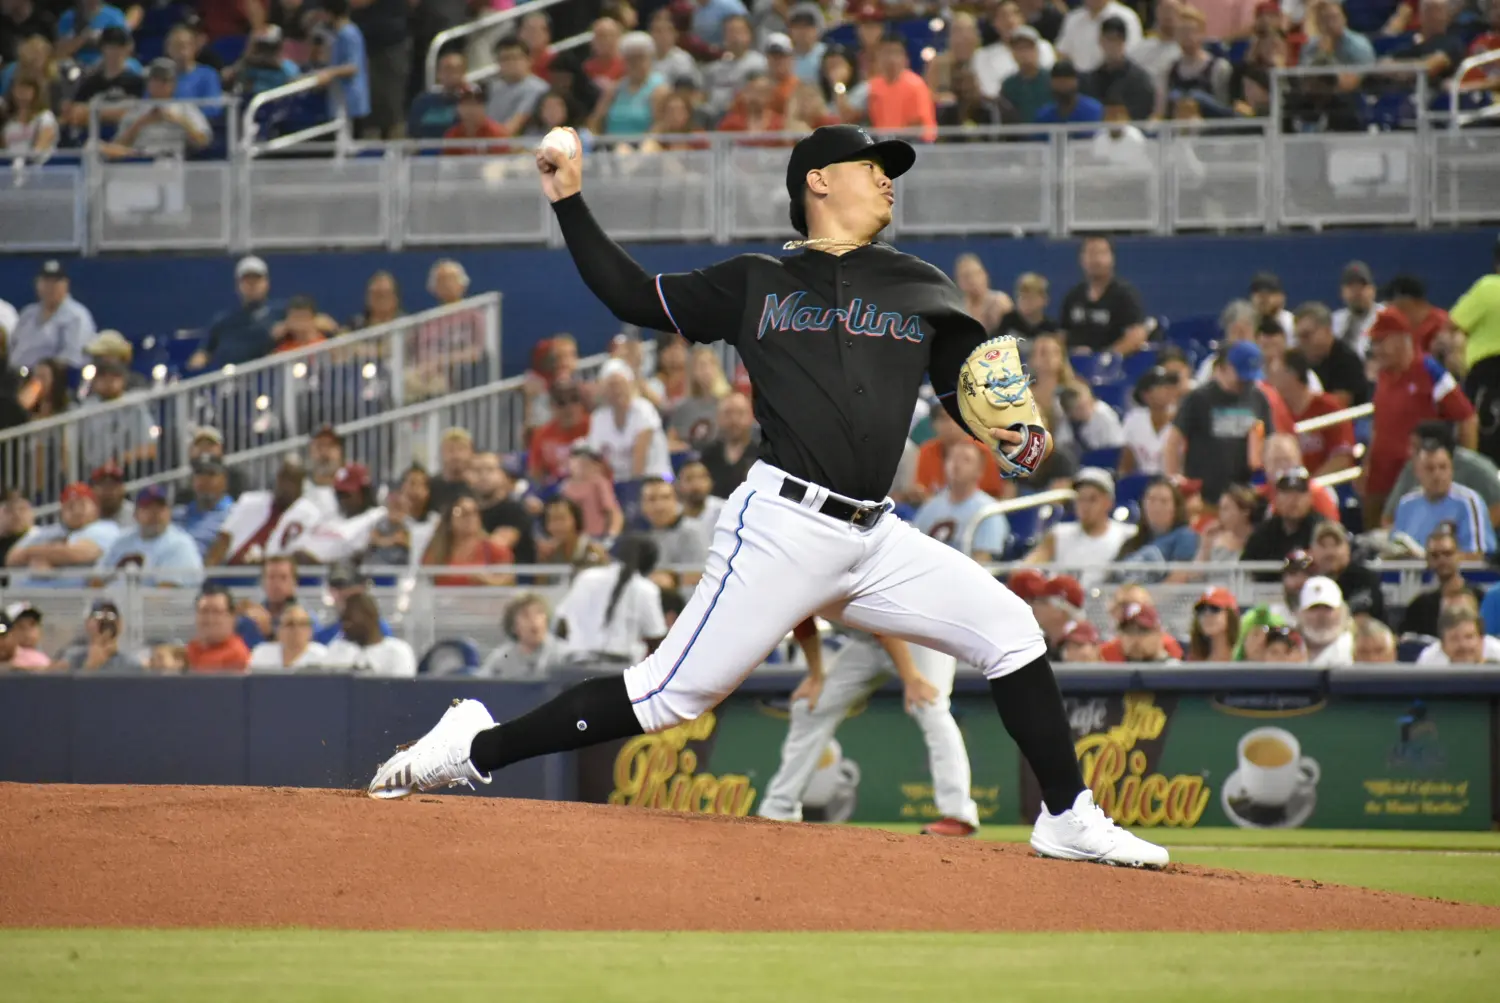 Five questions with Marlins rookie pitcher Jordan Yamamoto – Five